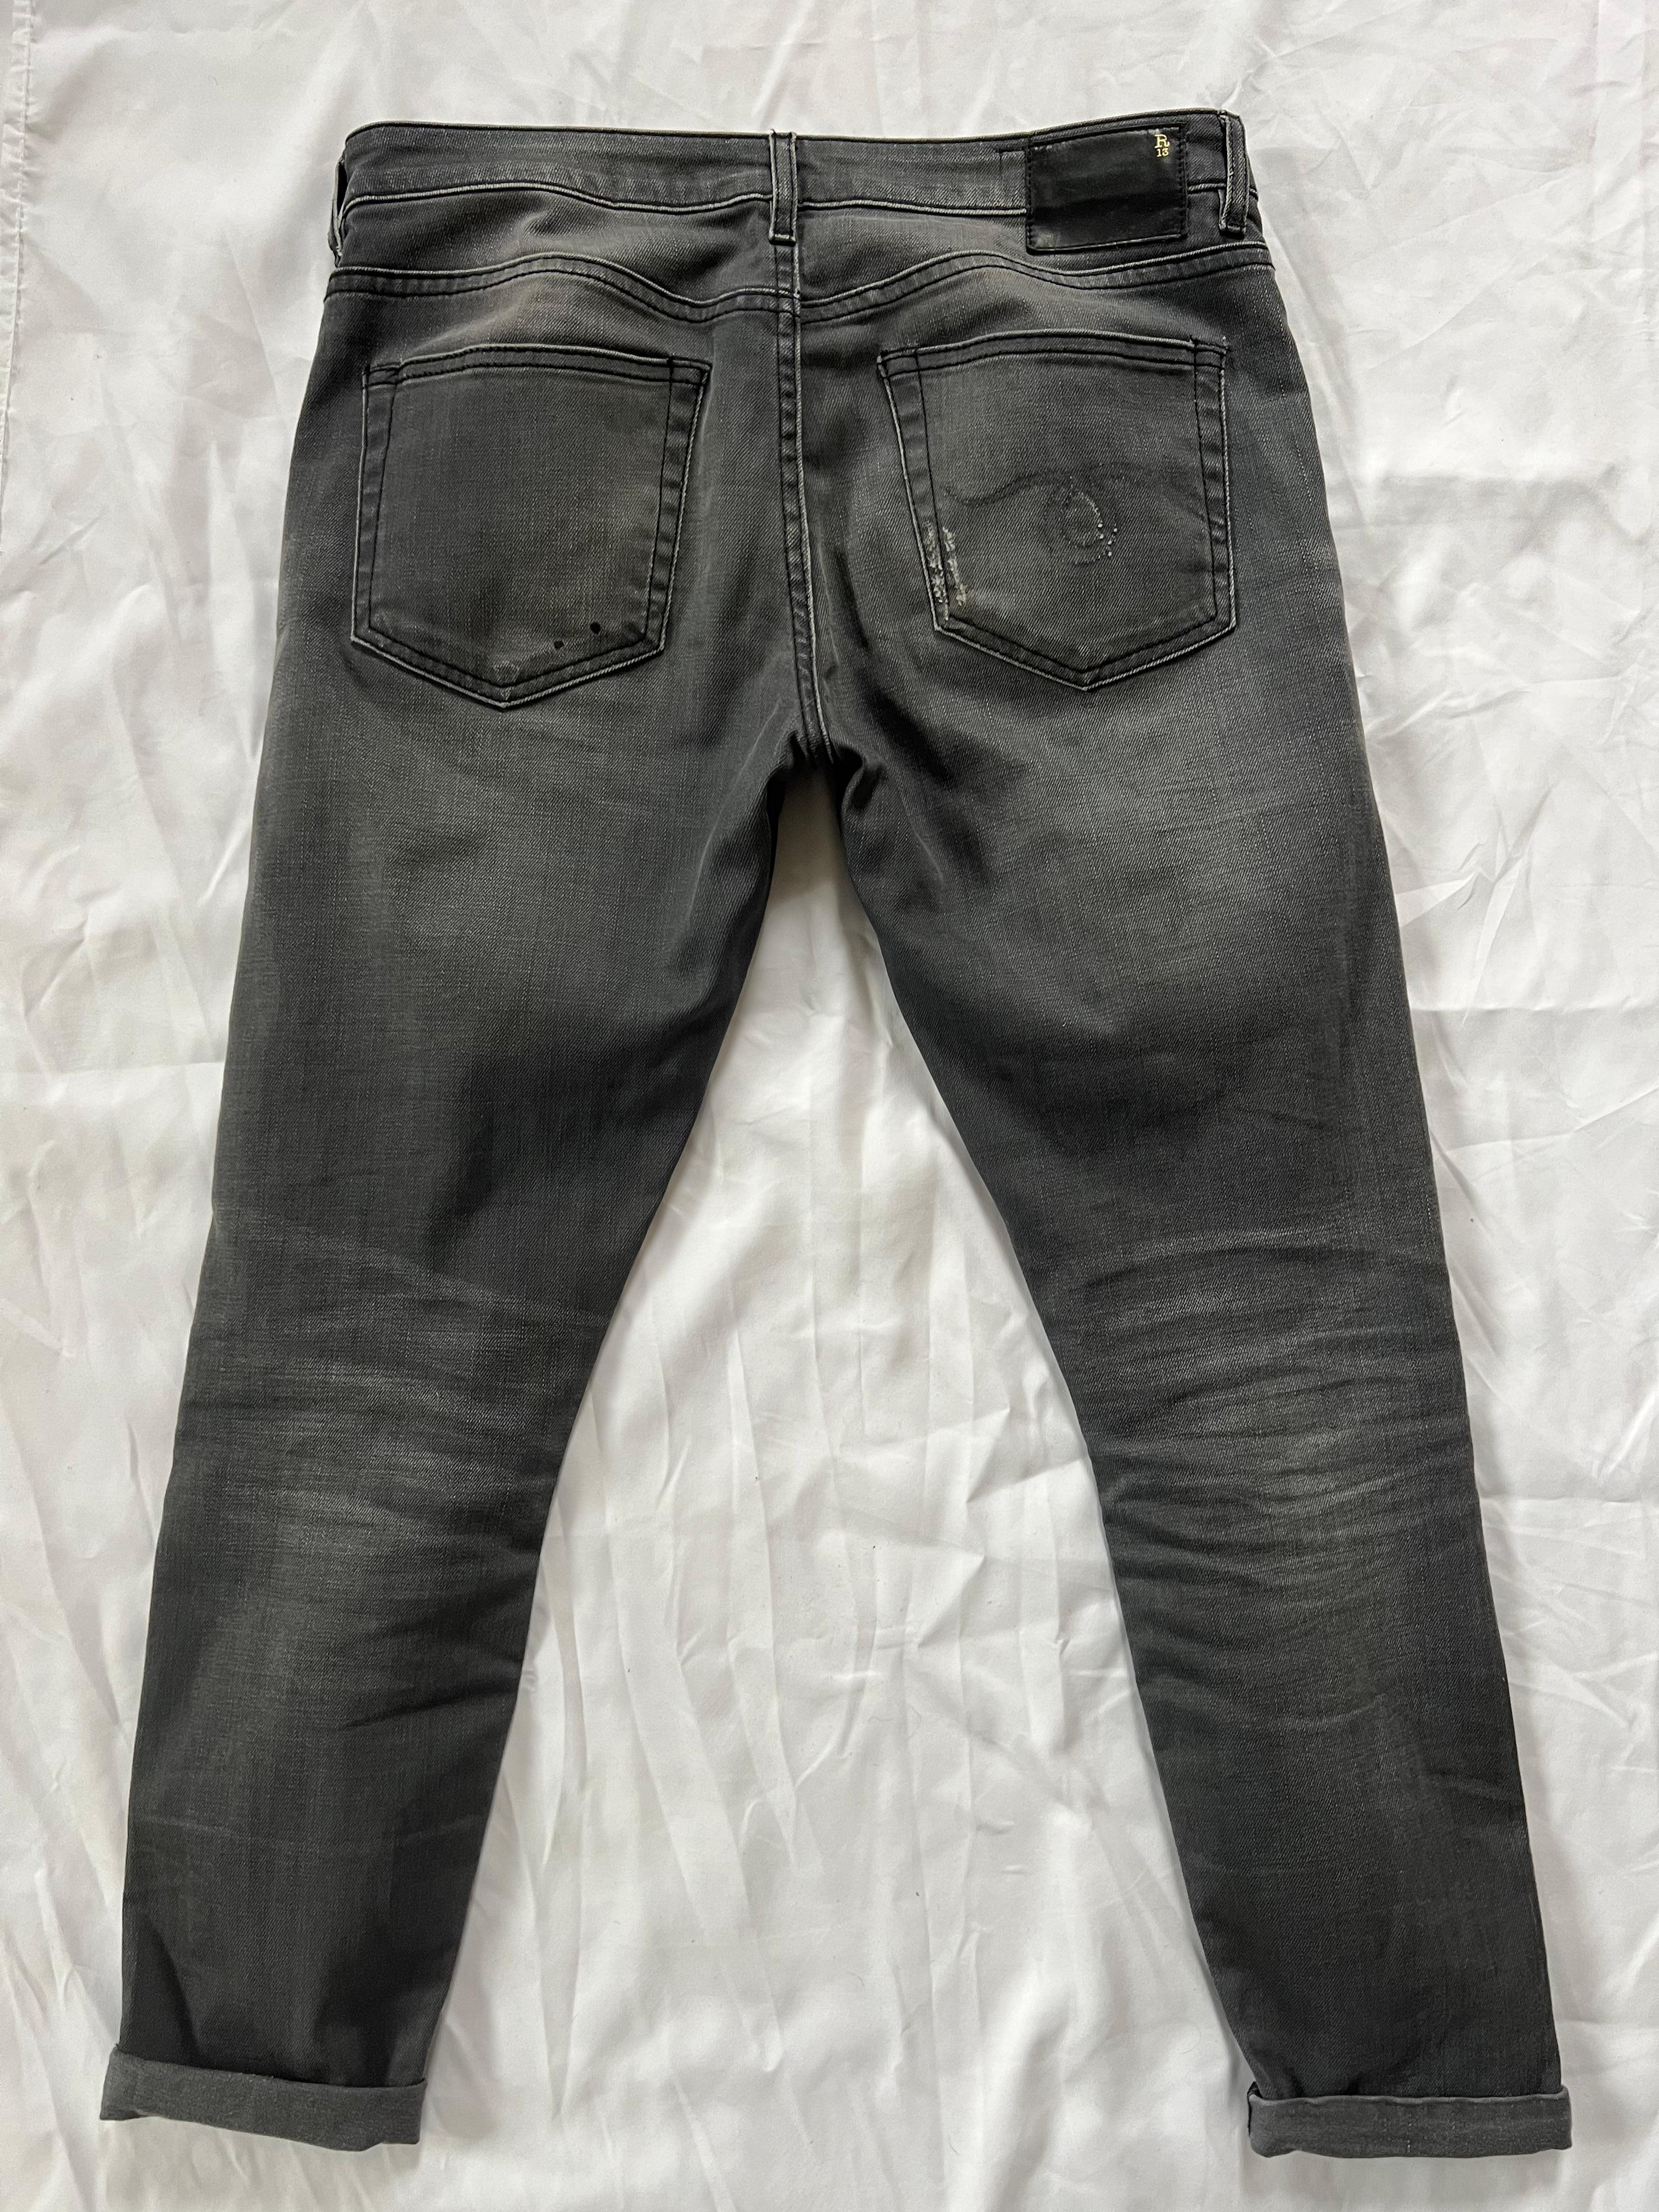 R13 Grey Orion Boy Skinny Jeans Pants, Size 27 In Excellent Condition For Sale In Beverly Hills, CA